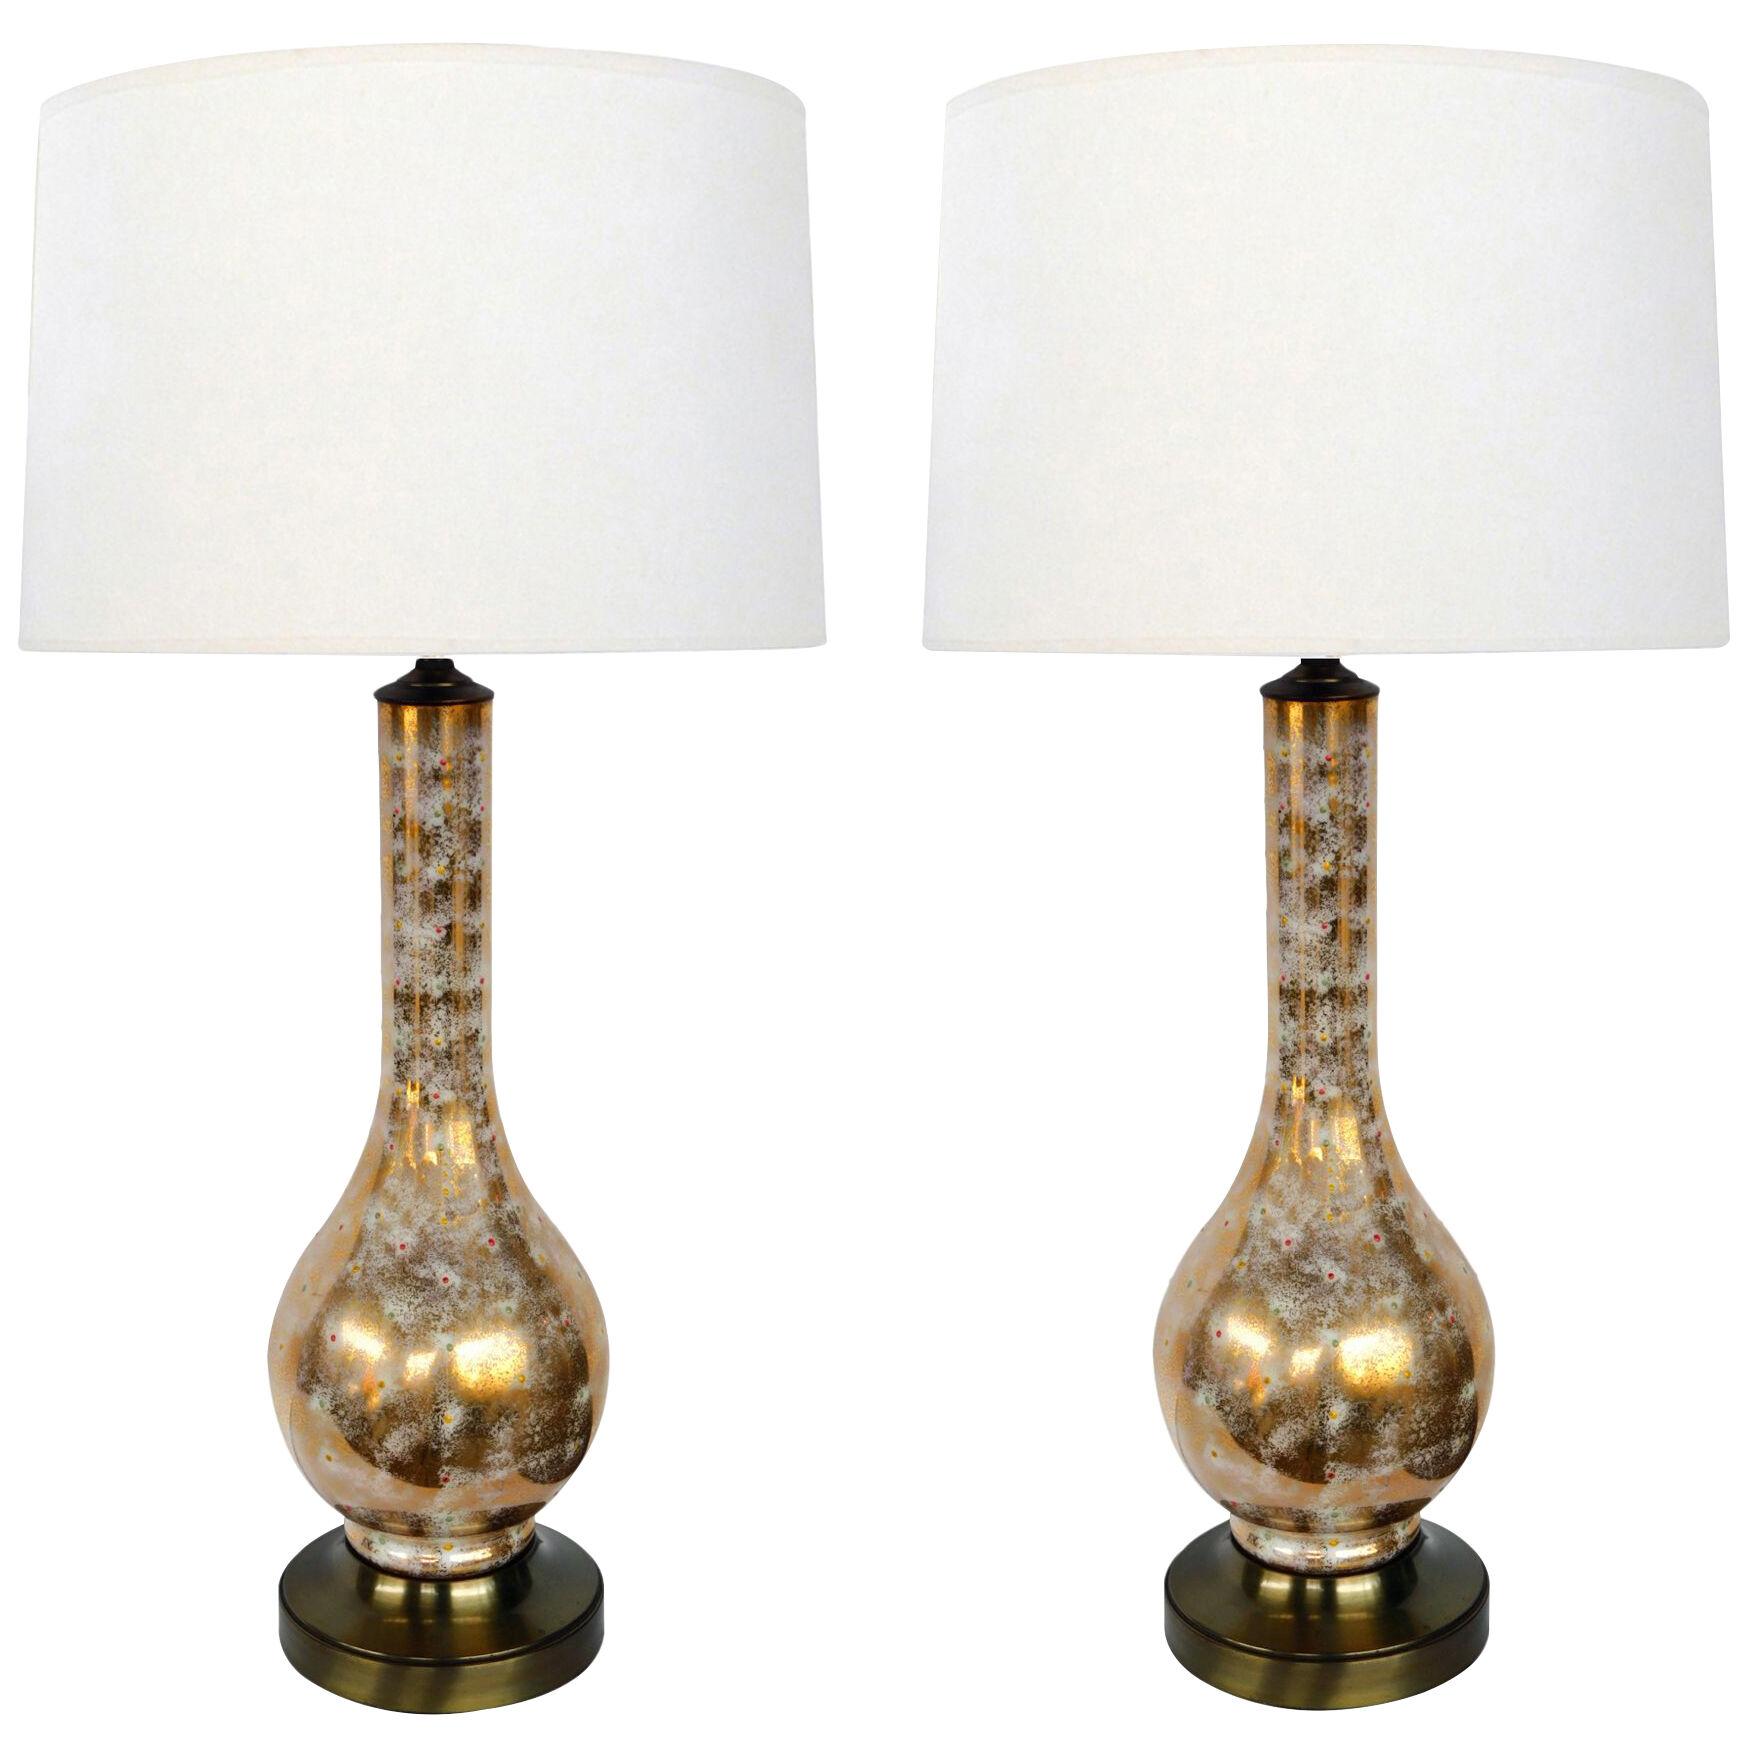 Pair Of Murano 1960's Gold & White Glazed Bottle-Form Lamps With Colored Flecks